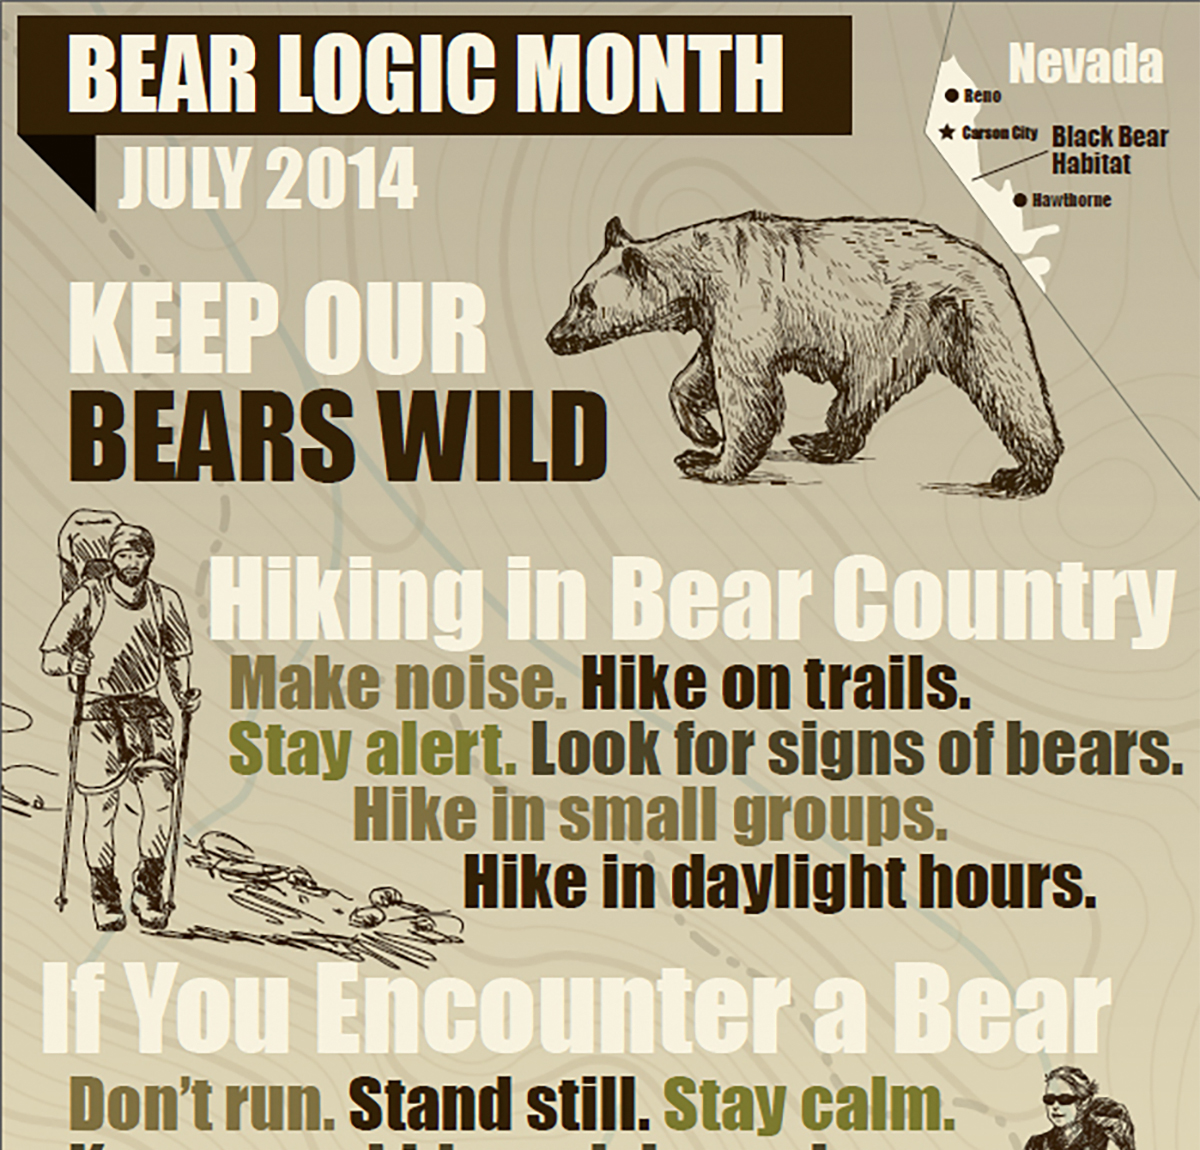 July is Bear Month - Hiking in Bear Country